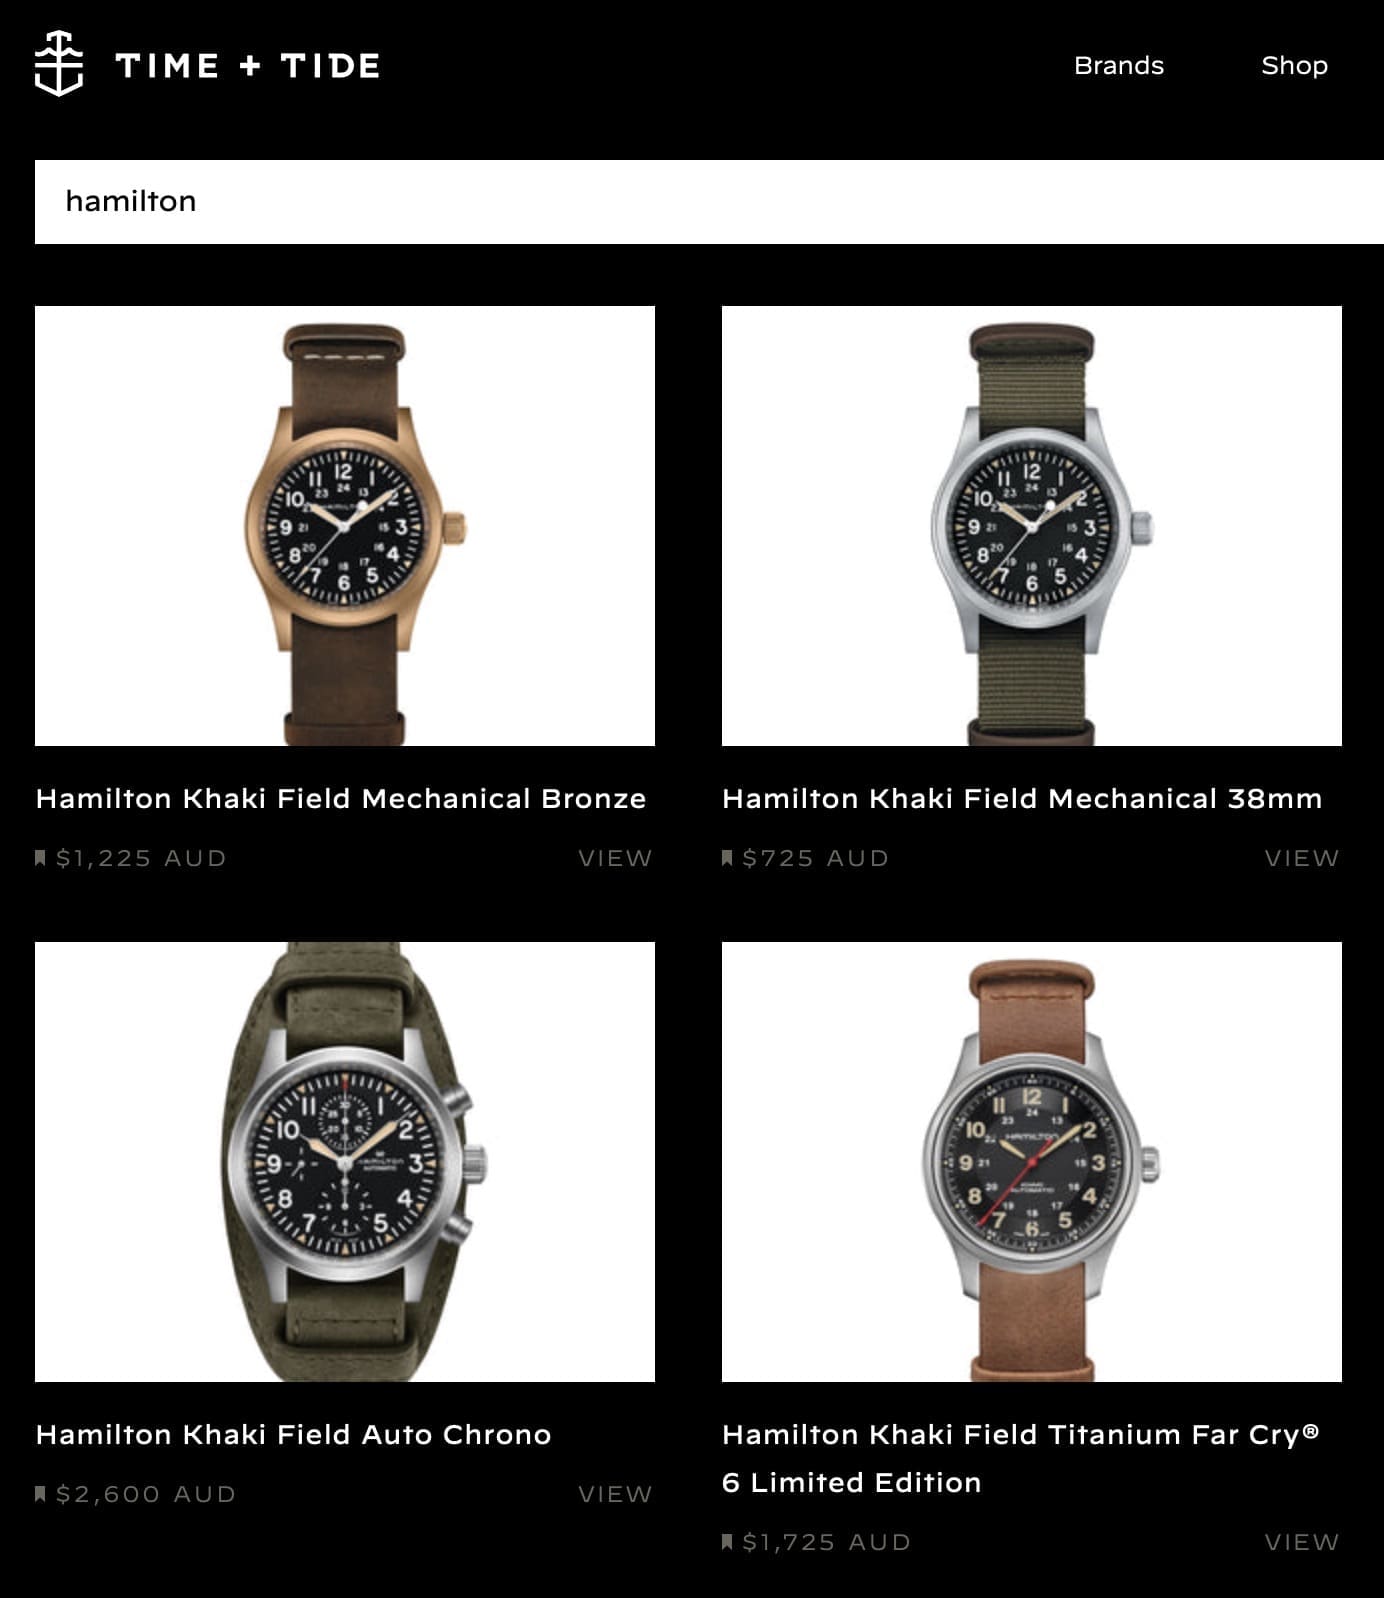 Time+Tide is now the place to buy Hamilton watches in Australia. Hallelujah!